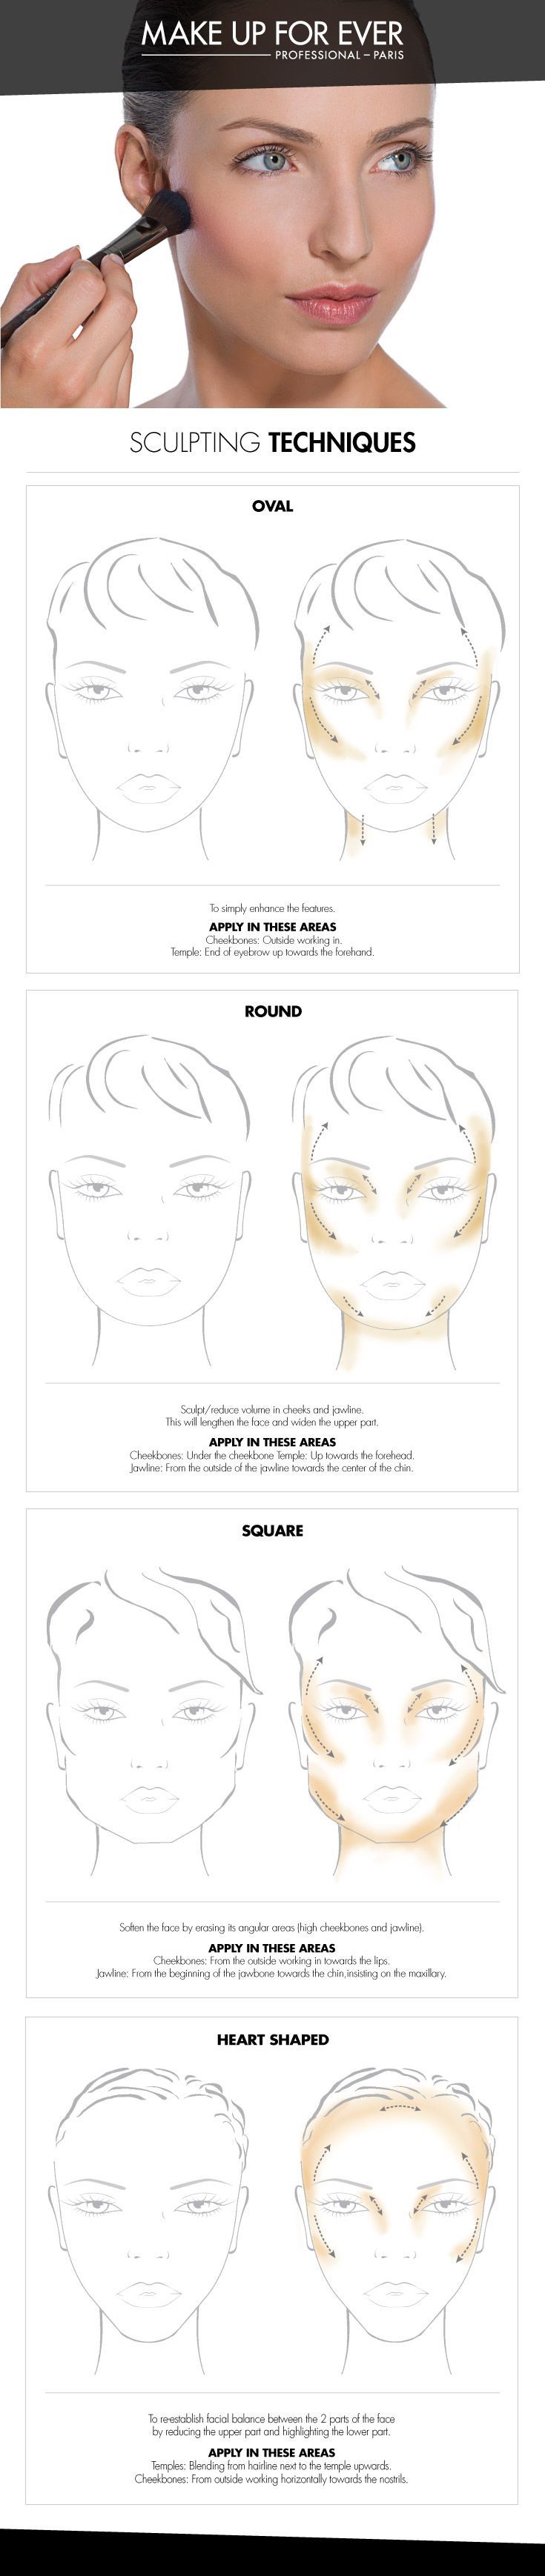 MAKE UP FOR EVER Sculpting techniques based on face shape.  #contouring